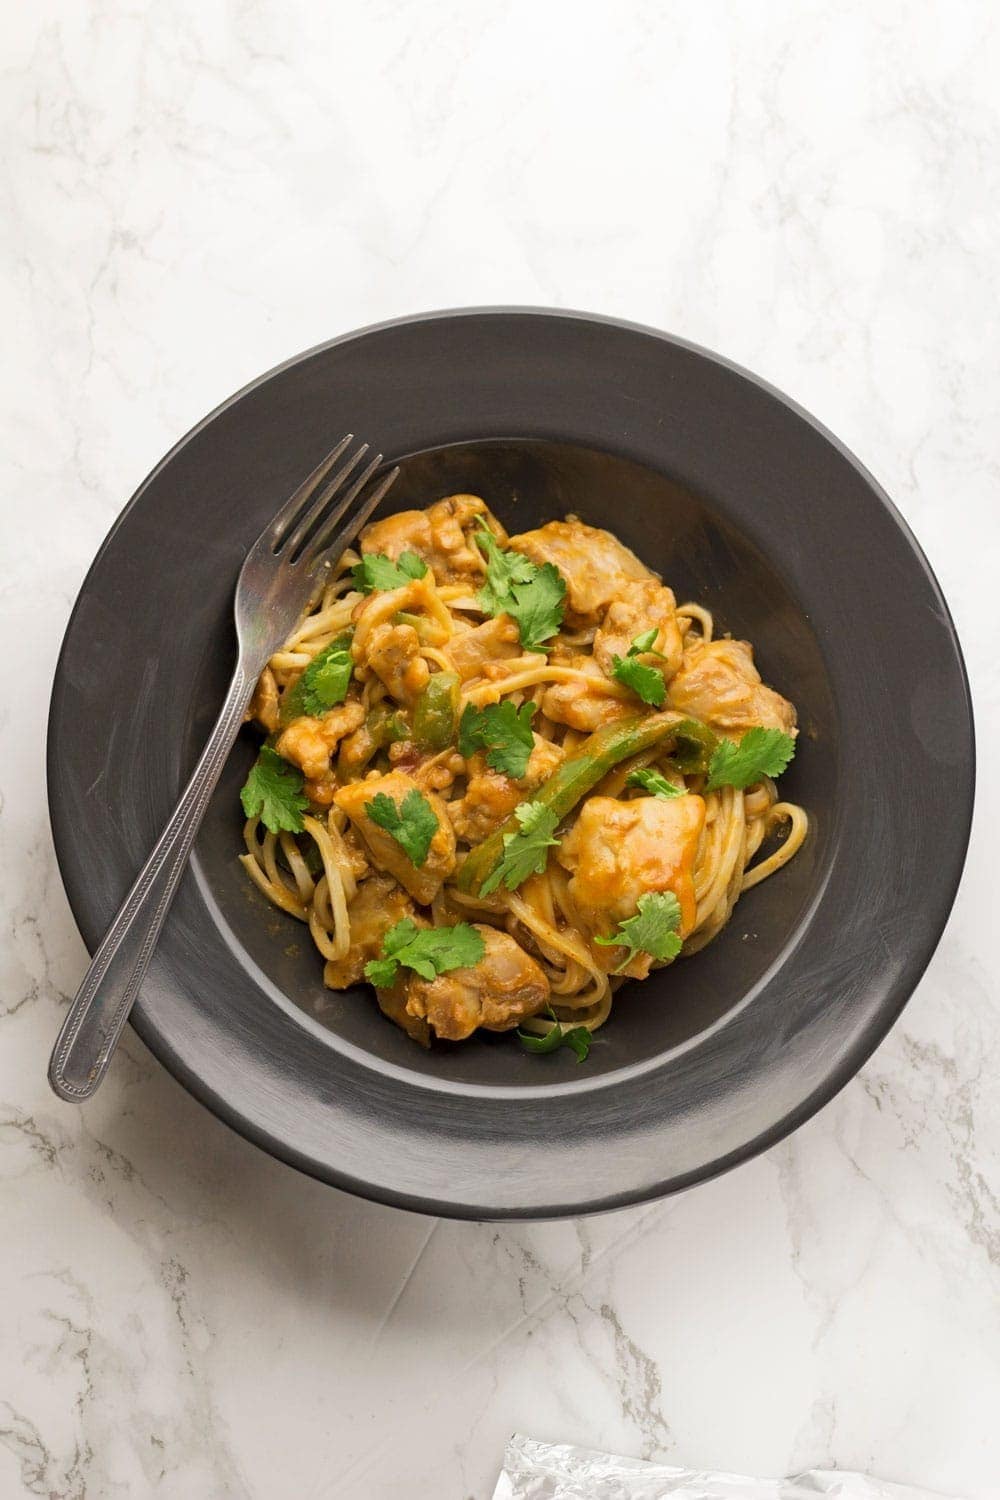 This peanut chicken is a quick weeknight recipe that tastes amazing. Serve over rice or noodles for an easy family dinner.